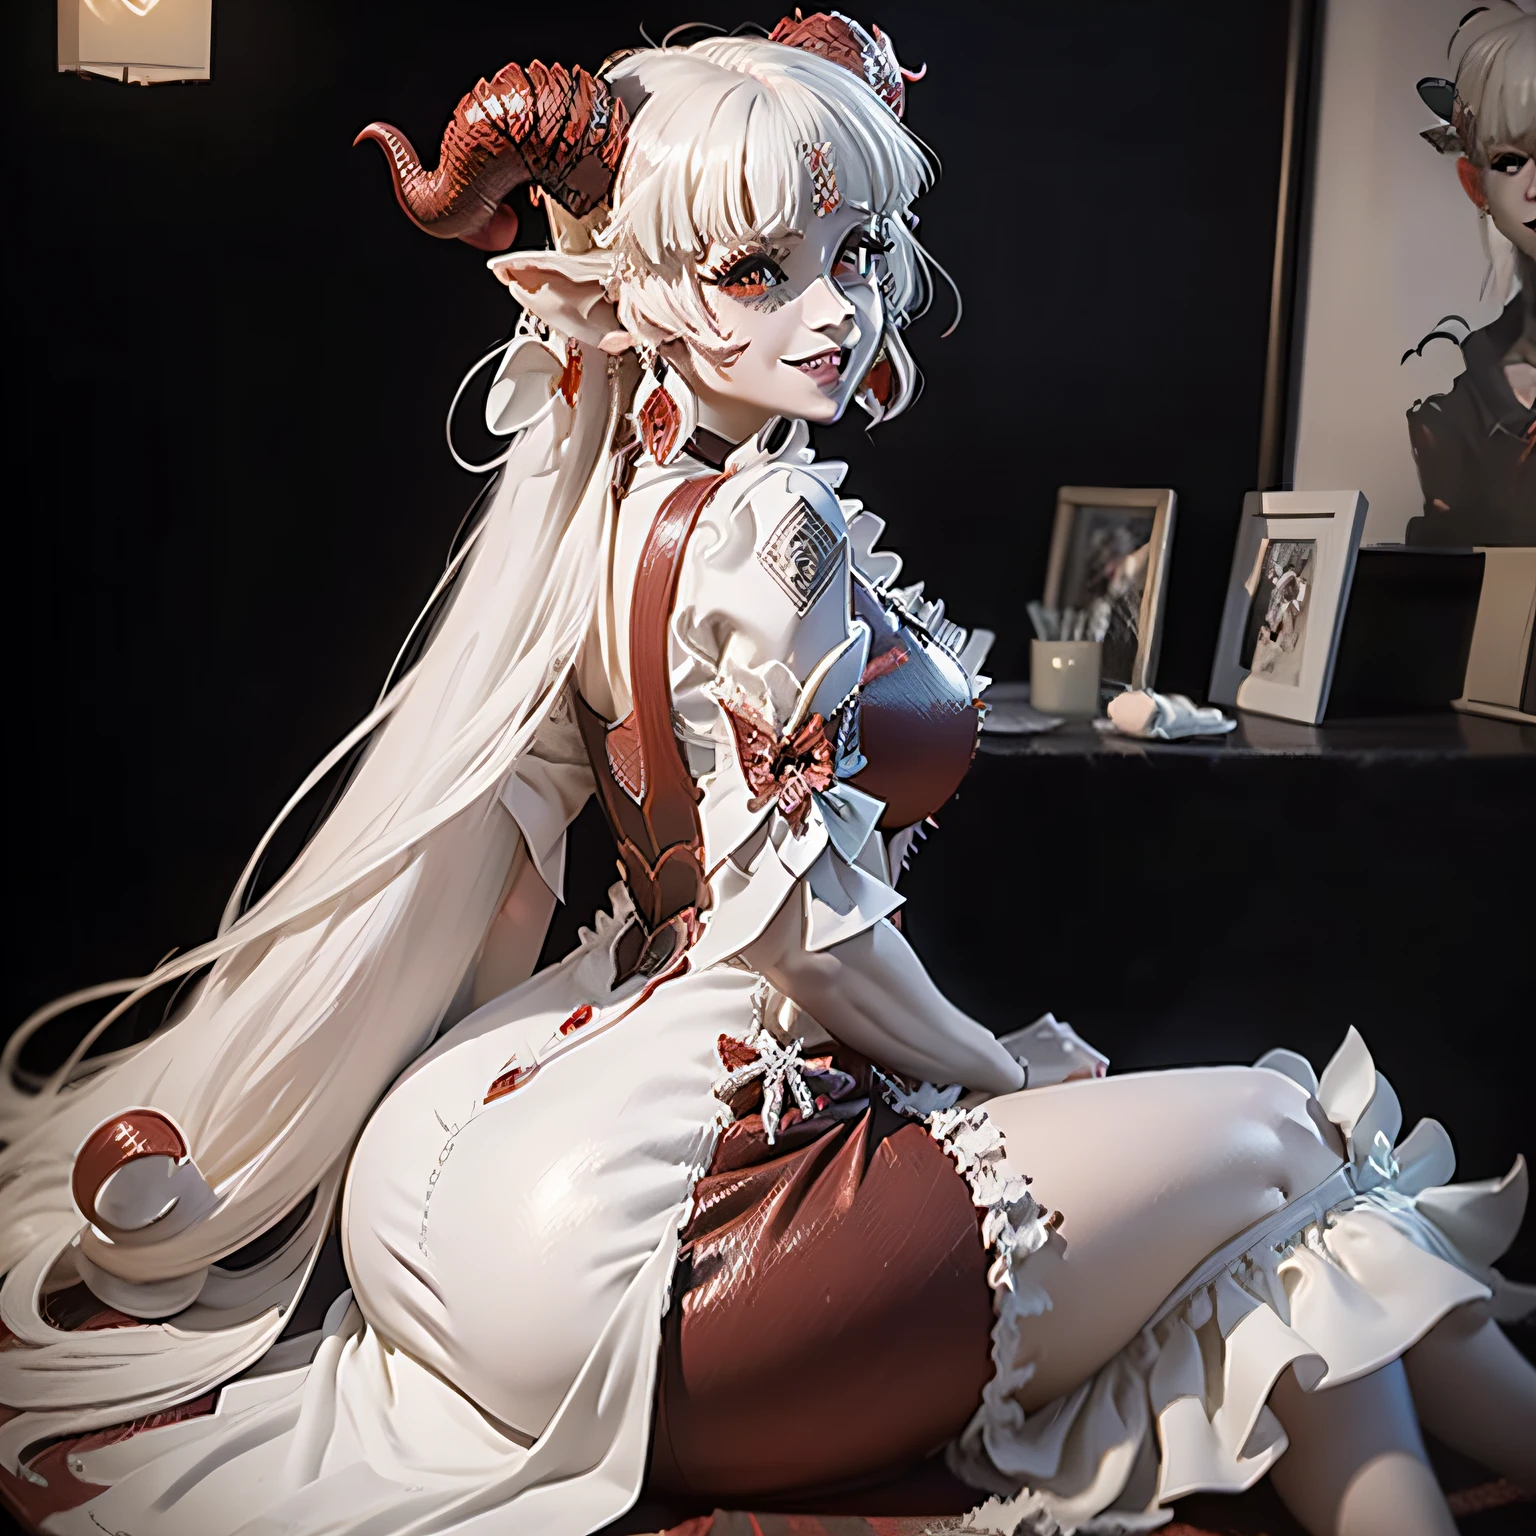 Albino-skinned woman with red whites with horns and horns on her head sitting at a table,  anime demon, 2. 5 d CGI动漫奇幻艺术作品 | | | | | | | | | | | | |, portrait of demon girl, 3 d render character art 8 k, Demon girl, detailed digital anime artwork, deviantart artstation cgscosiety, Succubus bonito | | | | | | | | | | | | |, arte conceitual escura fotorrealista, highly detailed digital art in 4k, ((Smile with extremely sharp teeth)), ((redgown)), ((( Extremely huge bust))), (((huge ass dressed)))